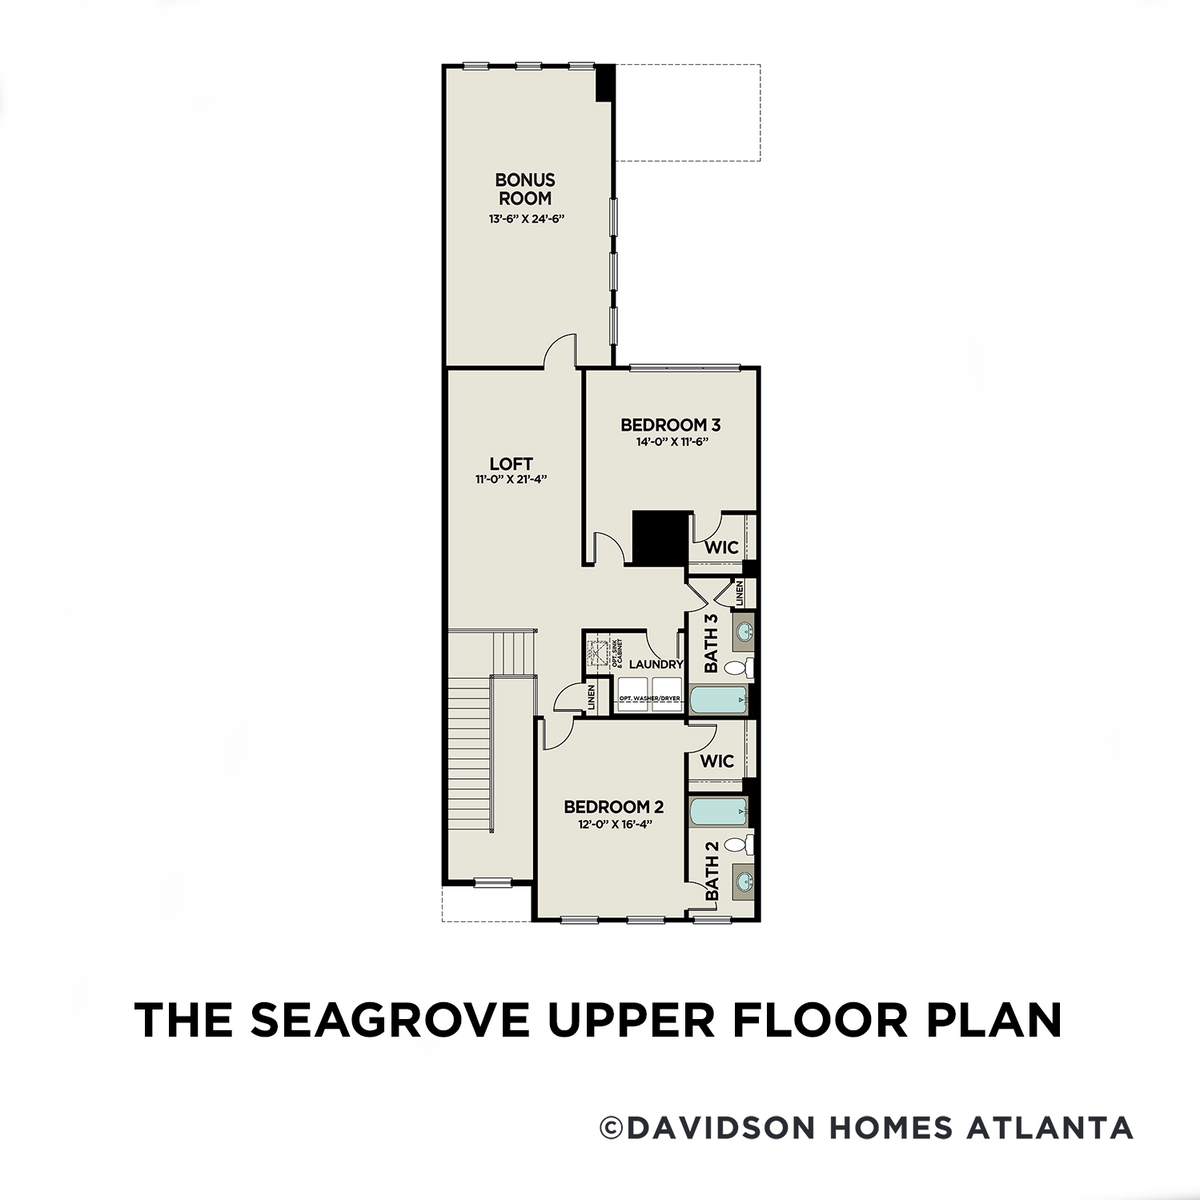 2 - The Seagrove B floor plan layout for 738 Stickley Oak Way in Davidson Homes' The Village at Towne Lake community.